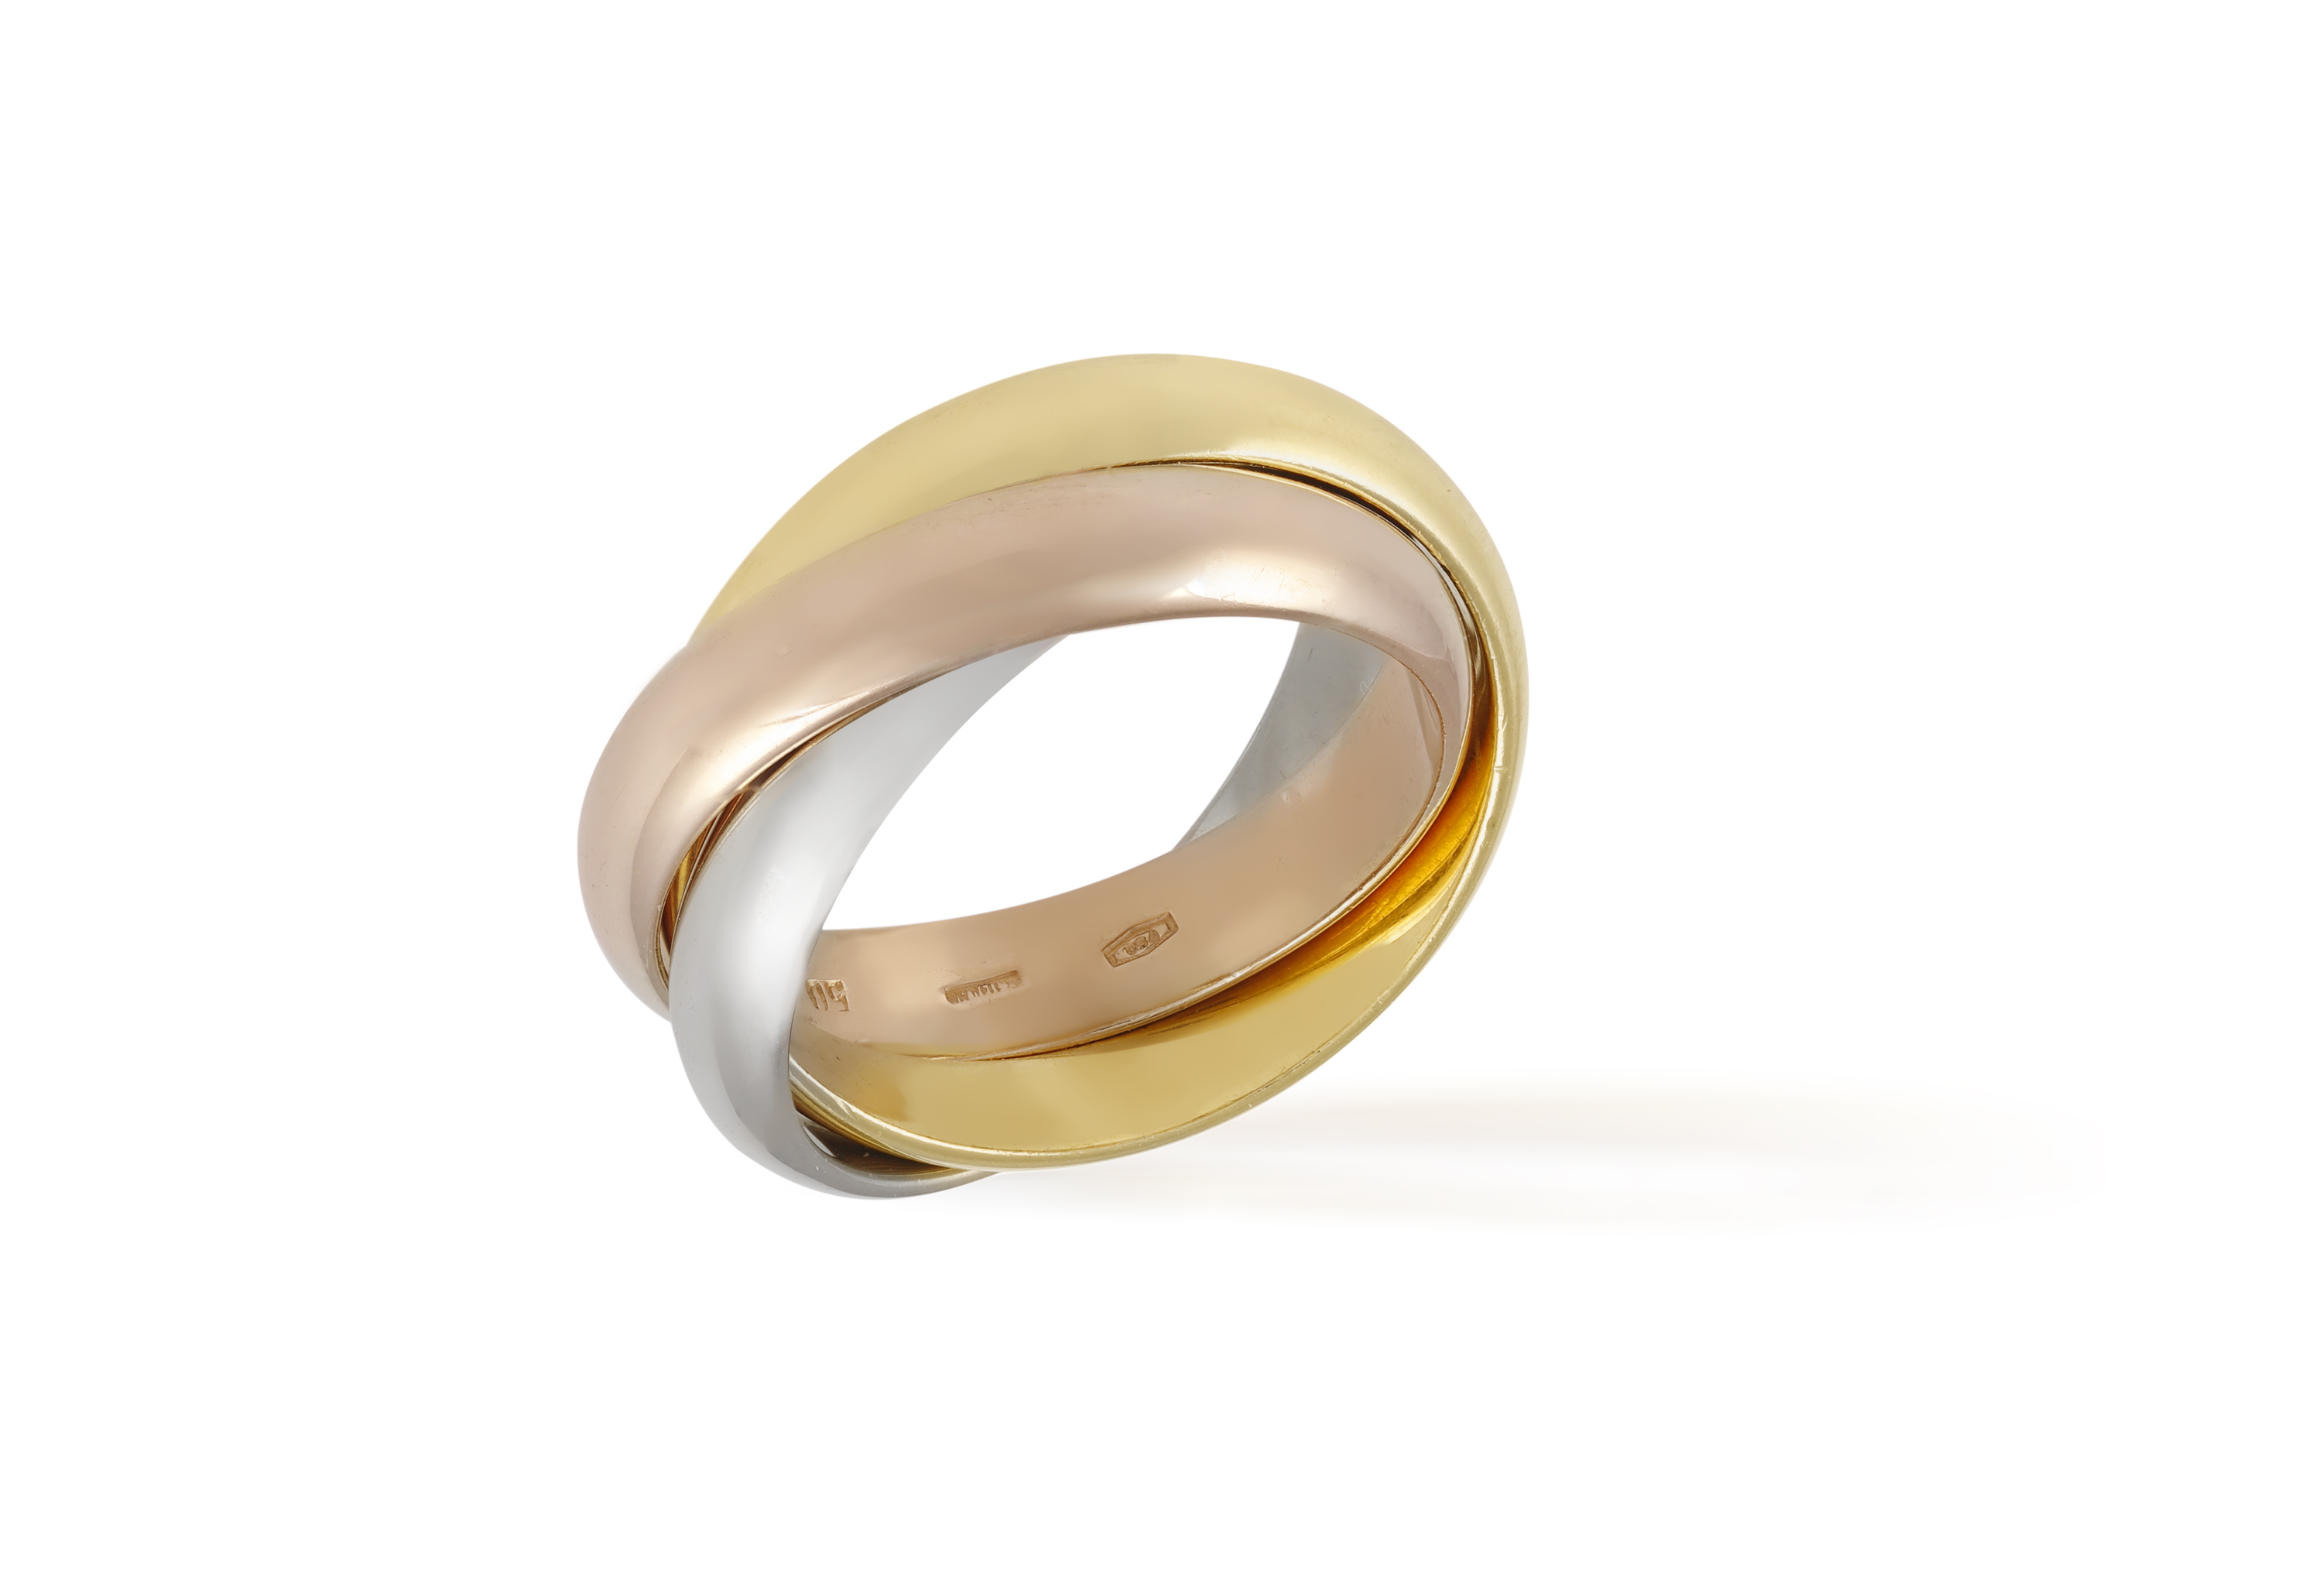 A TRI-COLOURED 'TRINITY' GOLD RING, BY CARTIER A three interlocking hoops of rose, yellow and